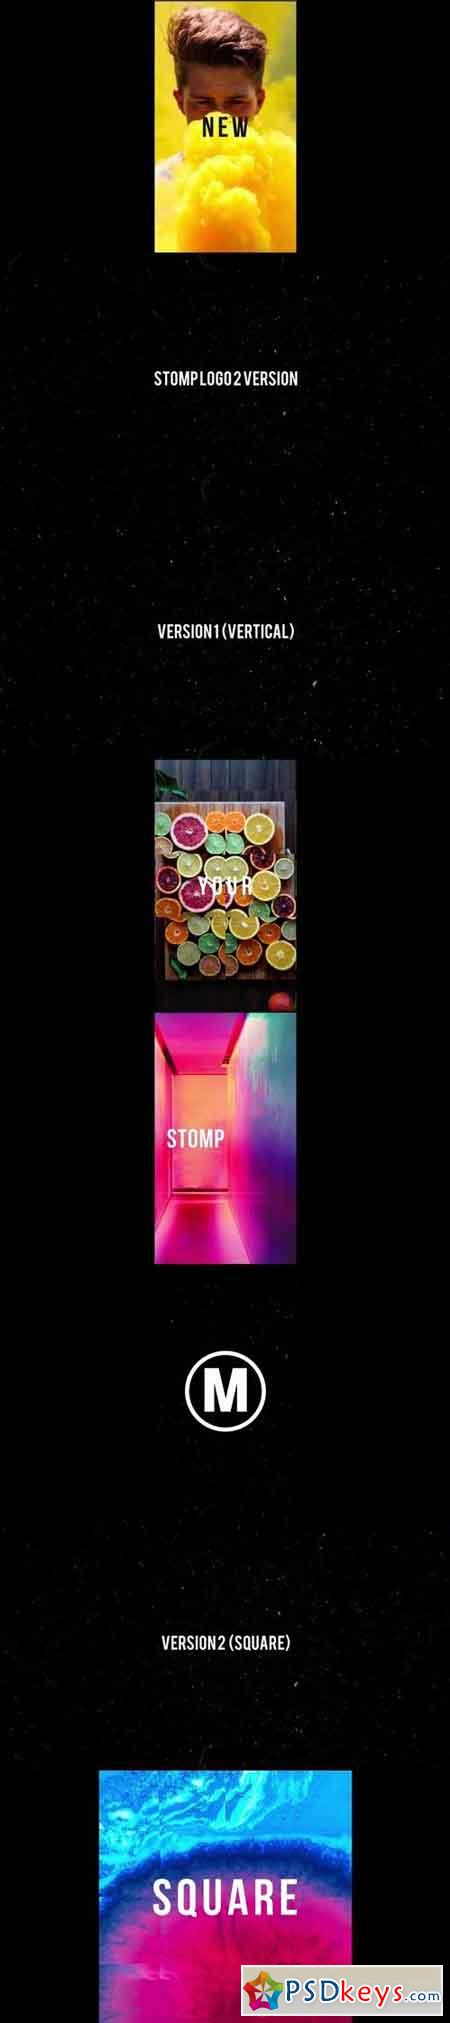 Dynamic Stomp Logo 56875 - After Effects Projects